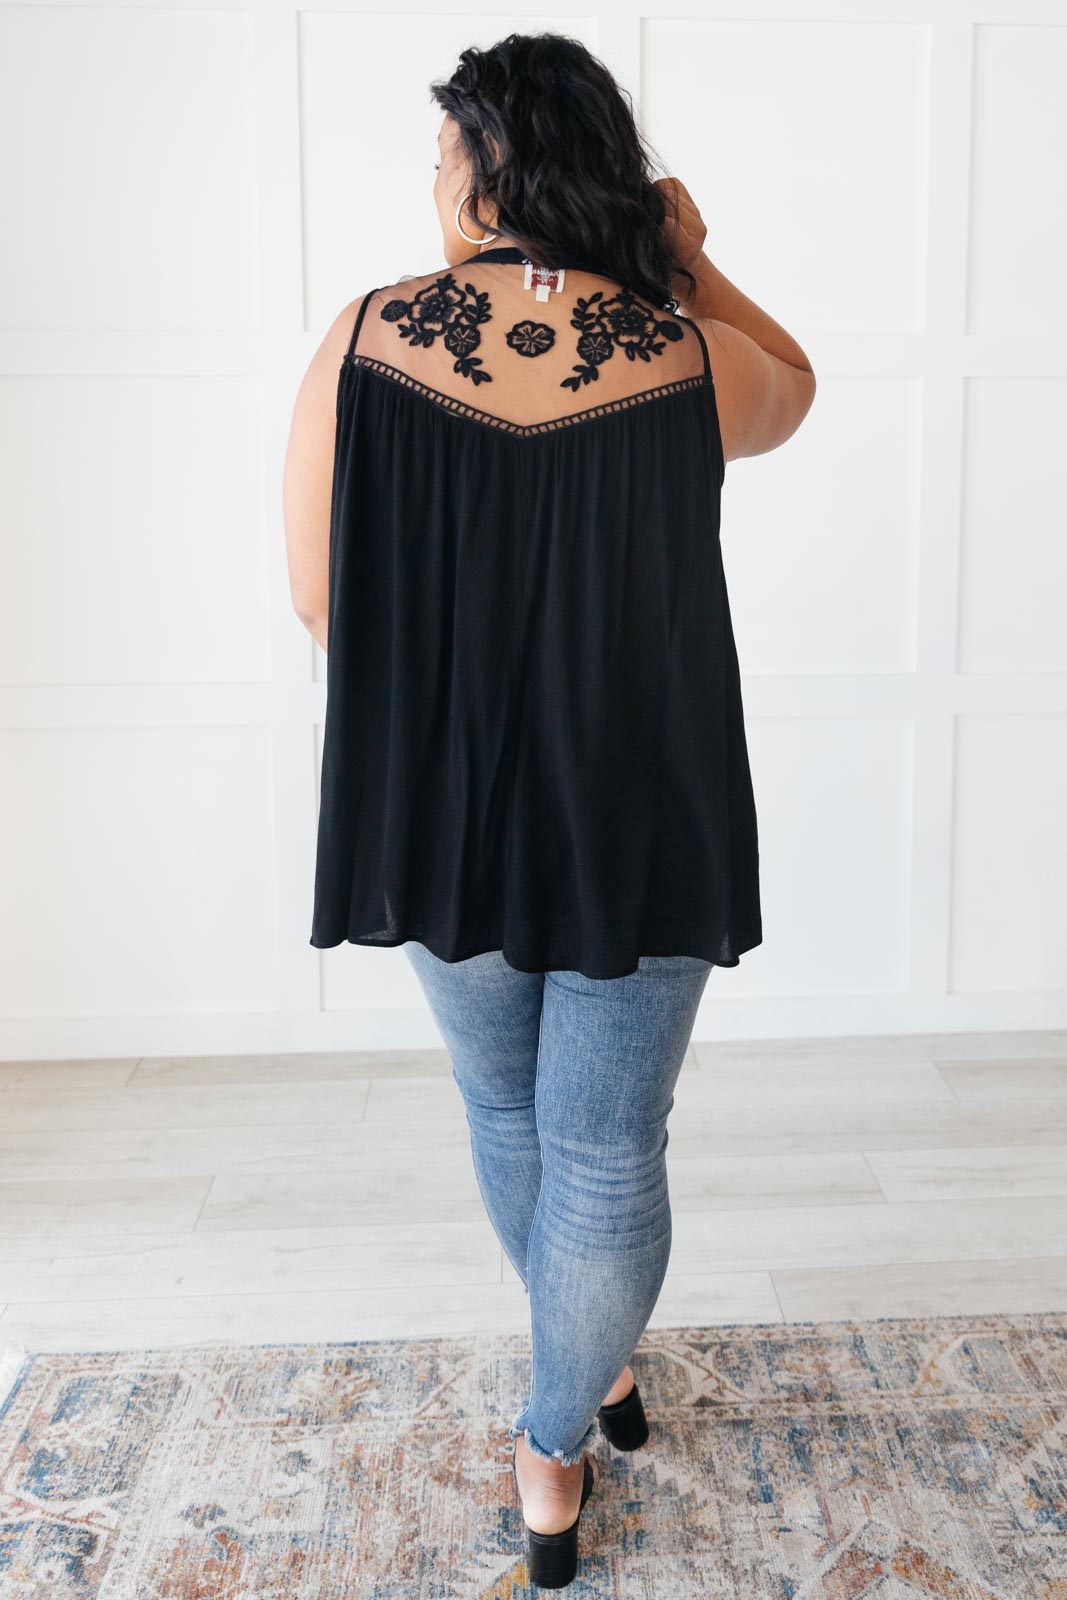 Floral Embroidered Swing Top in Black